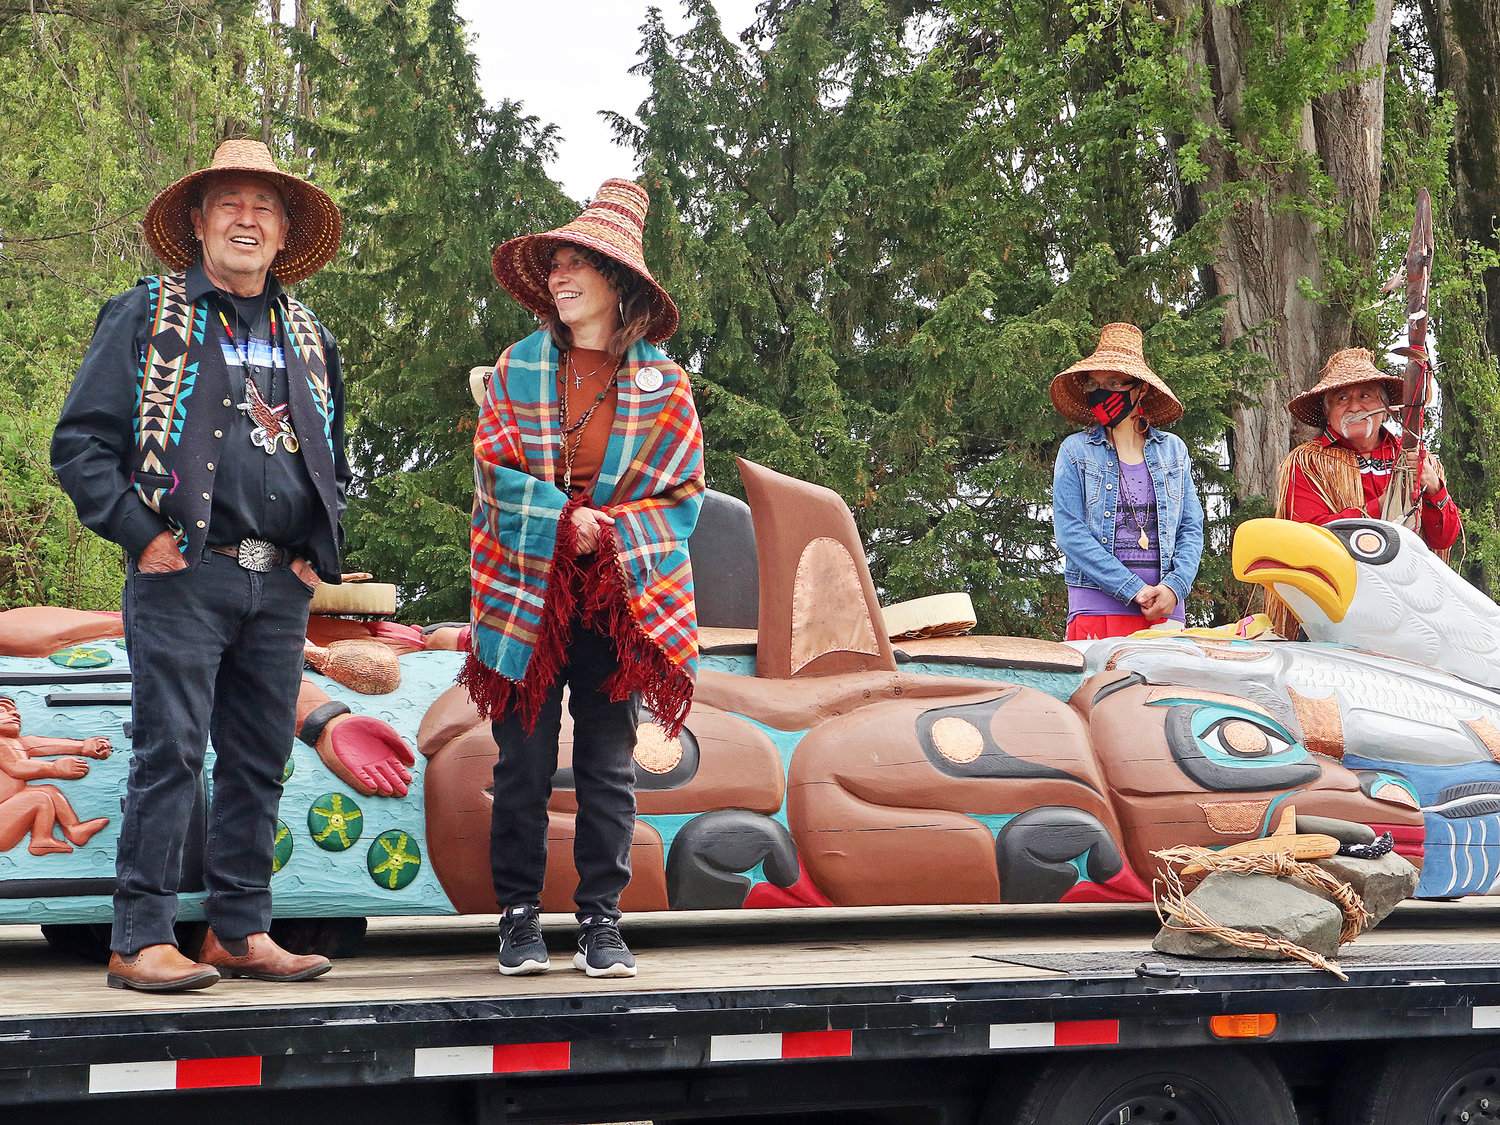 From l.; Douglas James, Siam’el wit, Heather Misanes and Jewell James are members of the Lummi Nation who helped carve and paint a totem pole to be presented to President Joe Biden later this summer. The group arrived in Birch Bay on May 8, one of many stops they will make while taking the totem pole on their Red Road to D.C. journey.